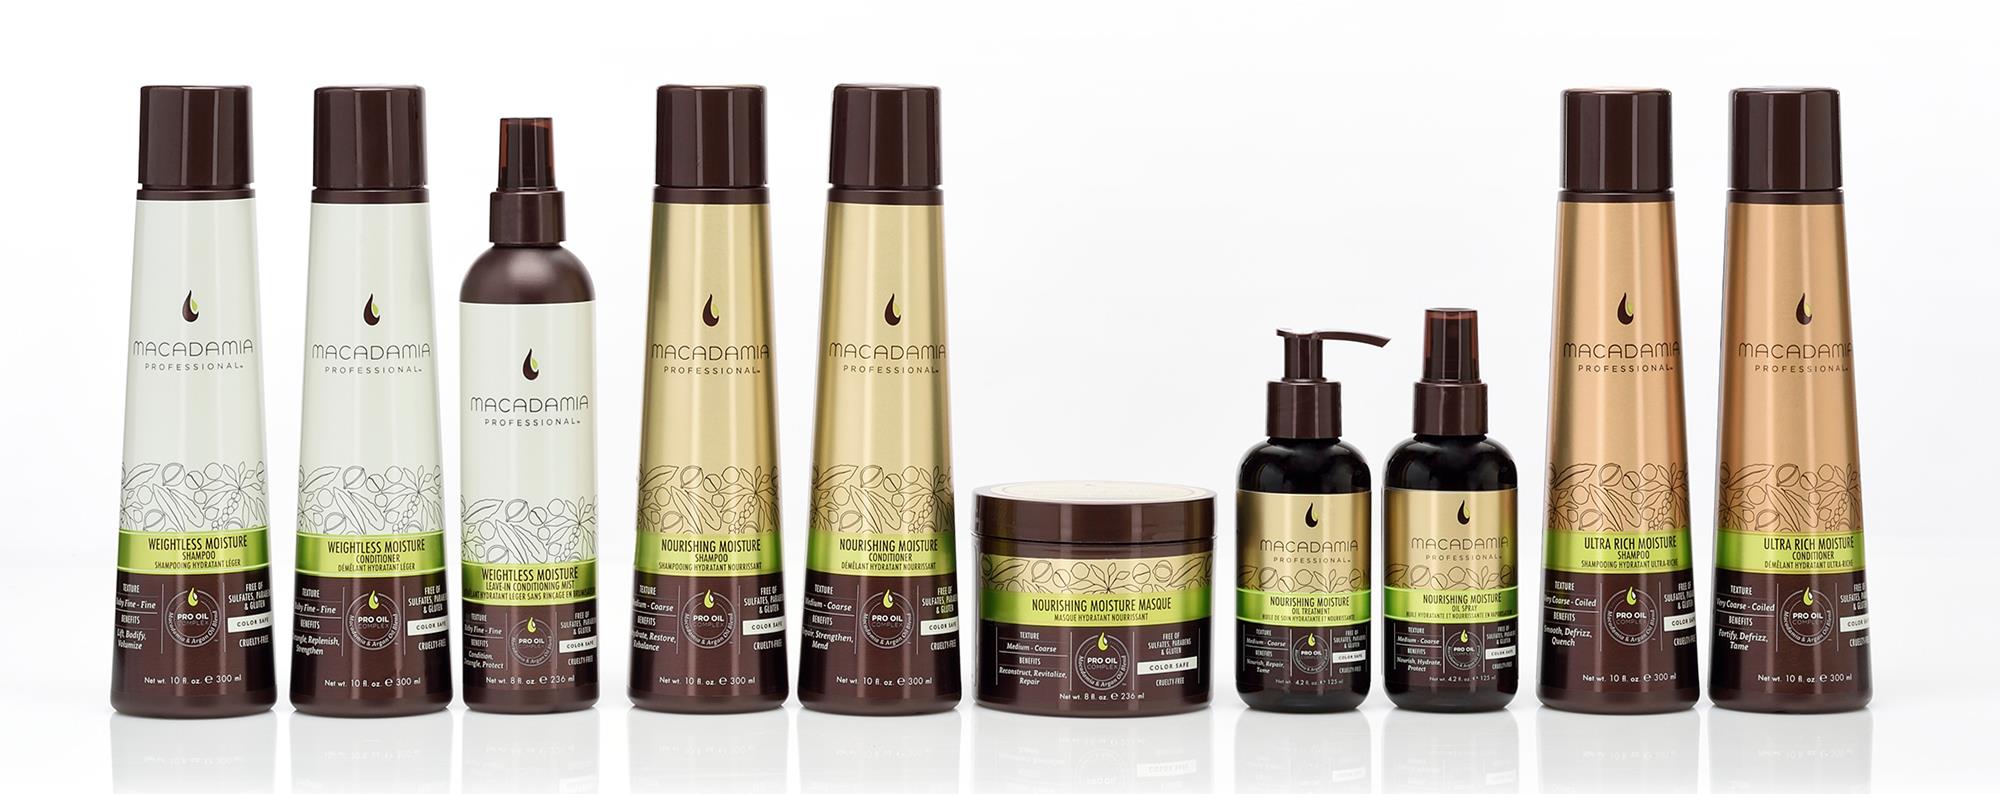 Macadamia Professional Hair Products